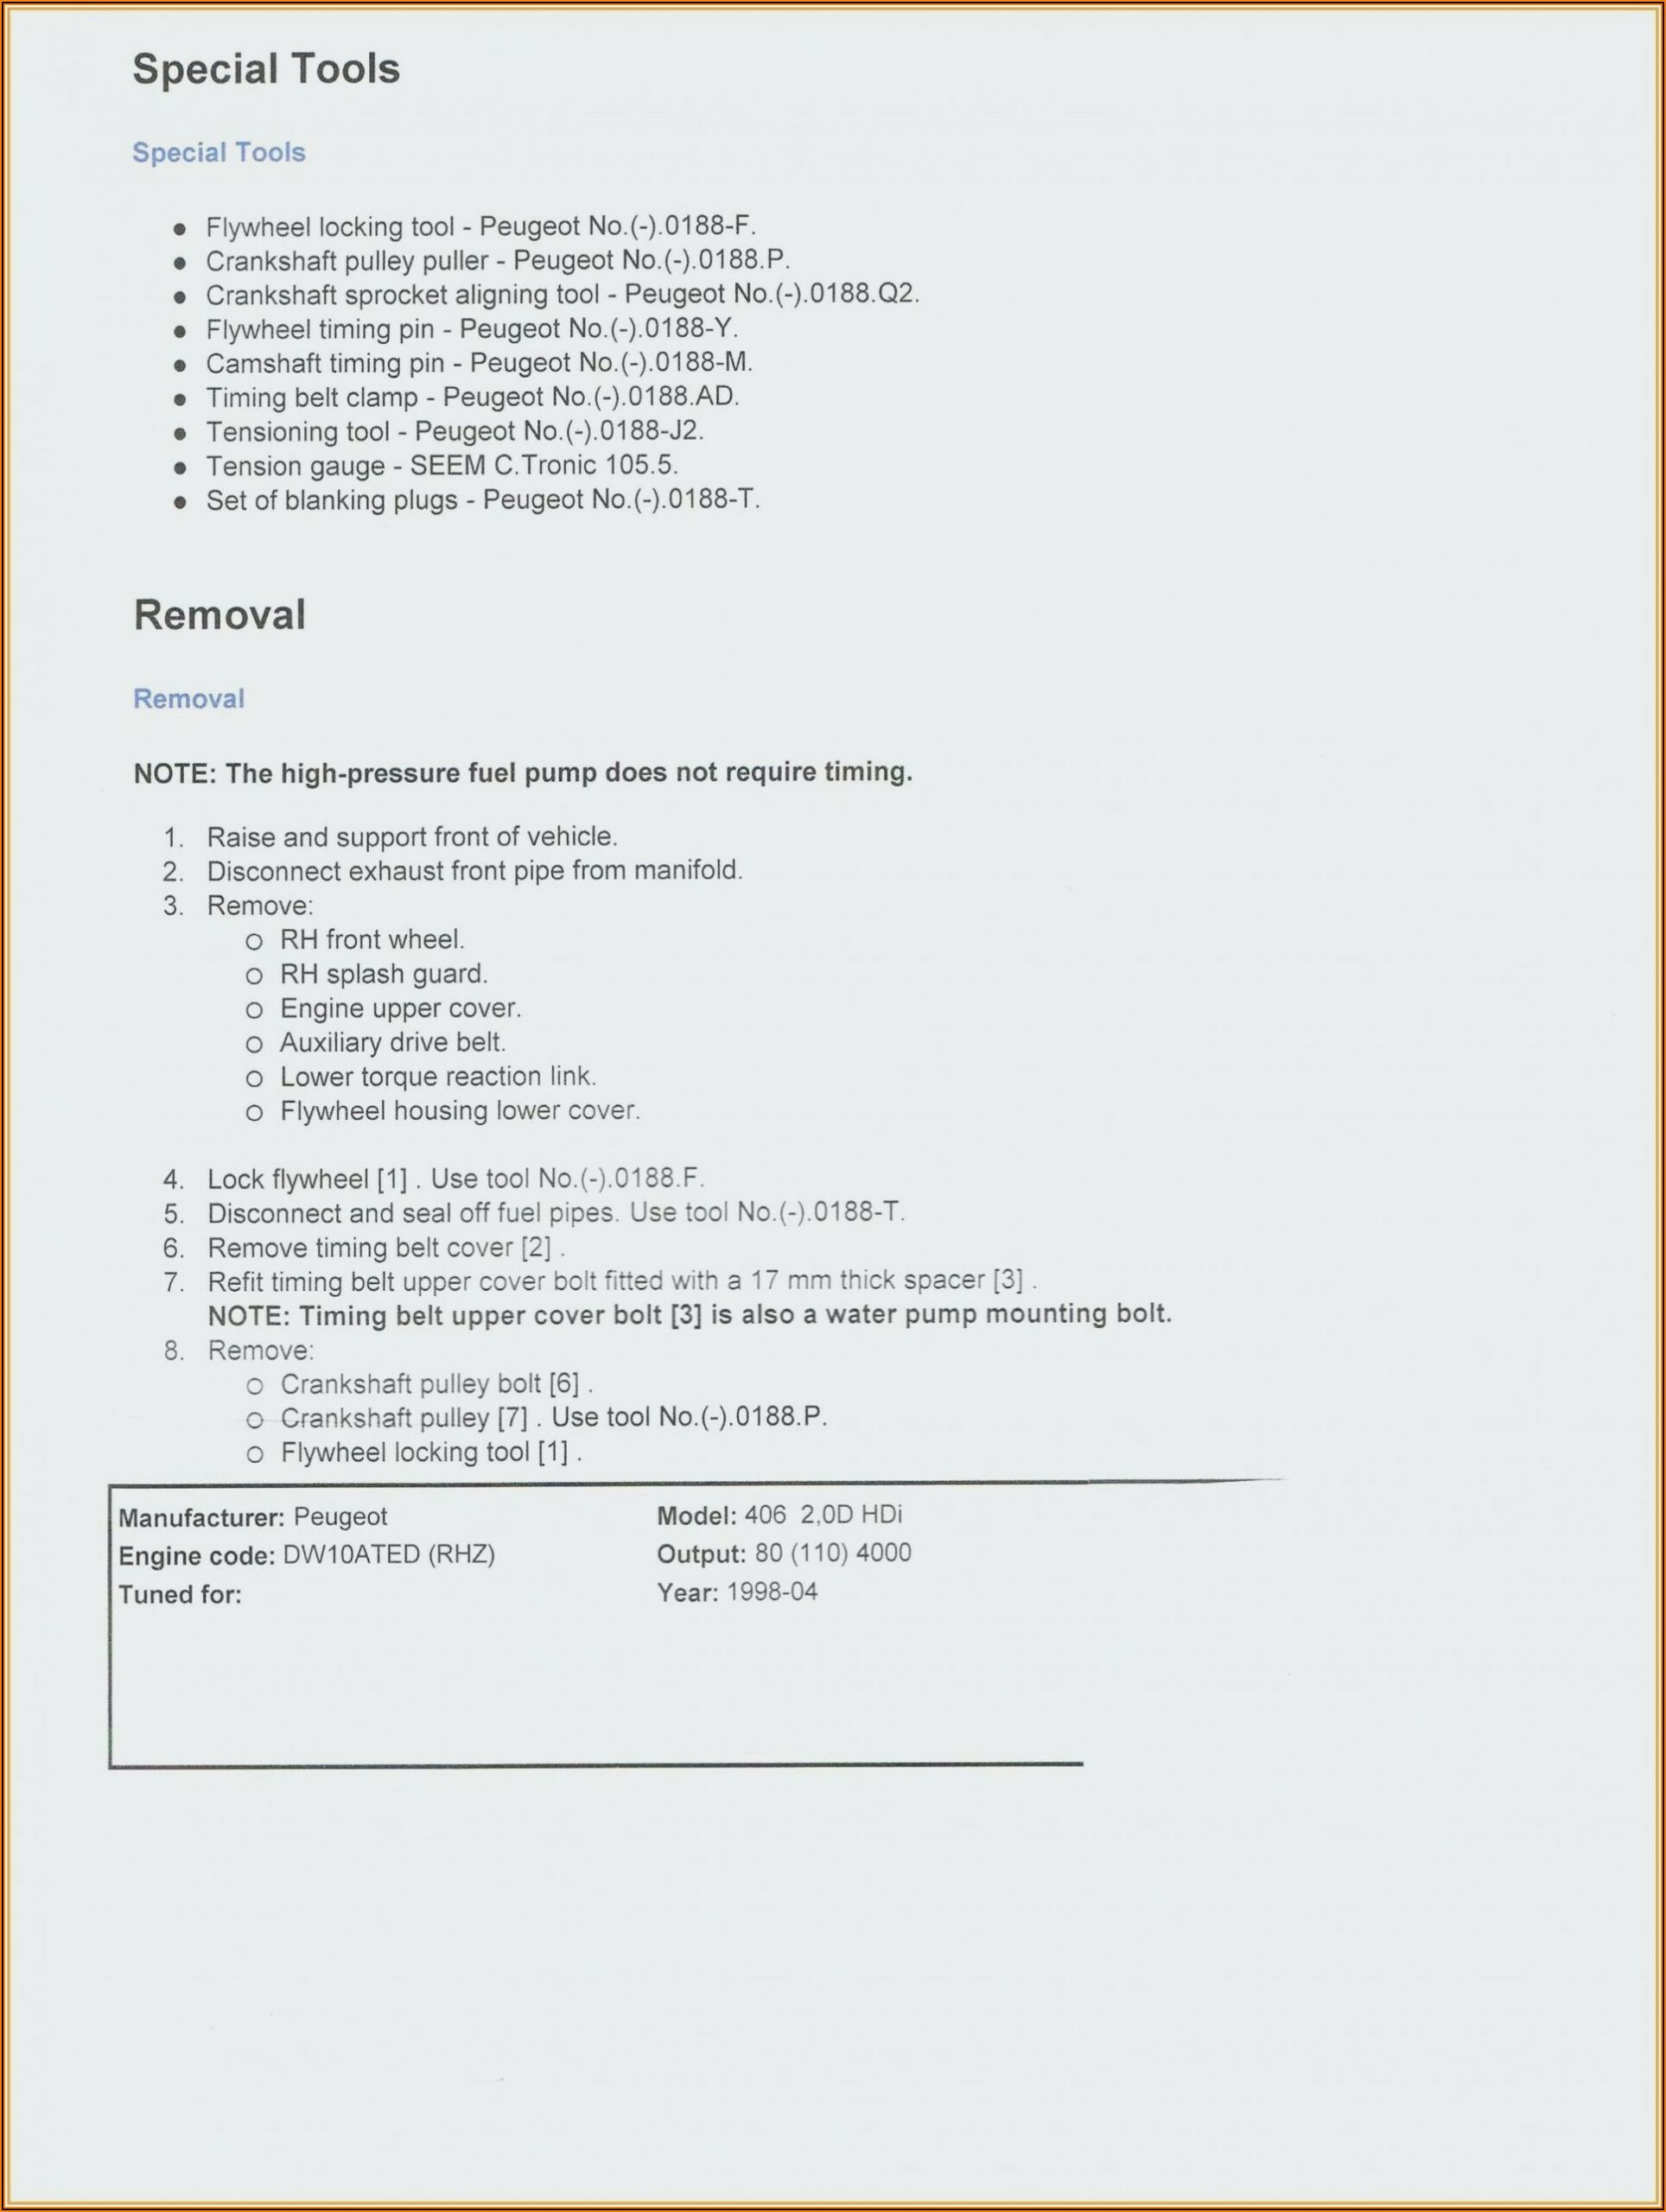 Surgical Tech Resume Sample No Experience